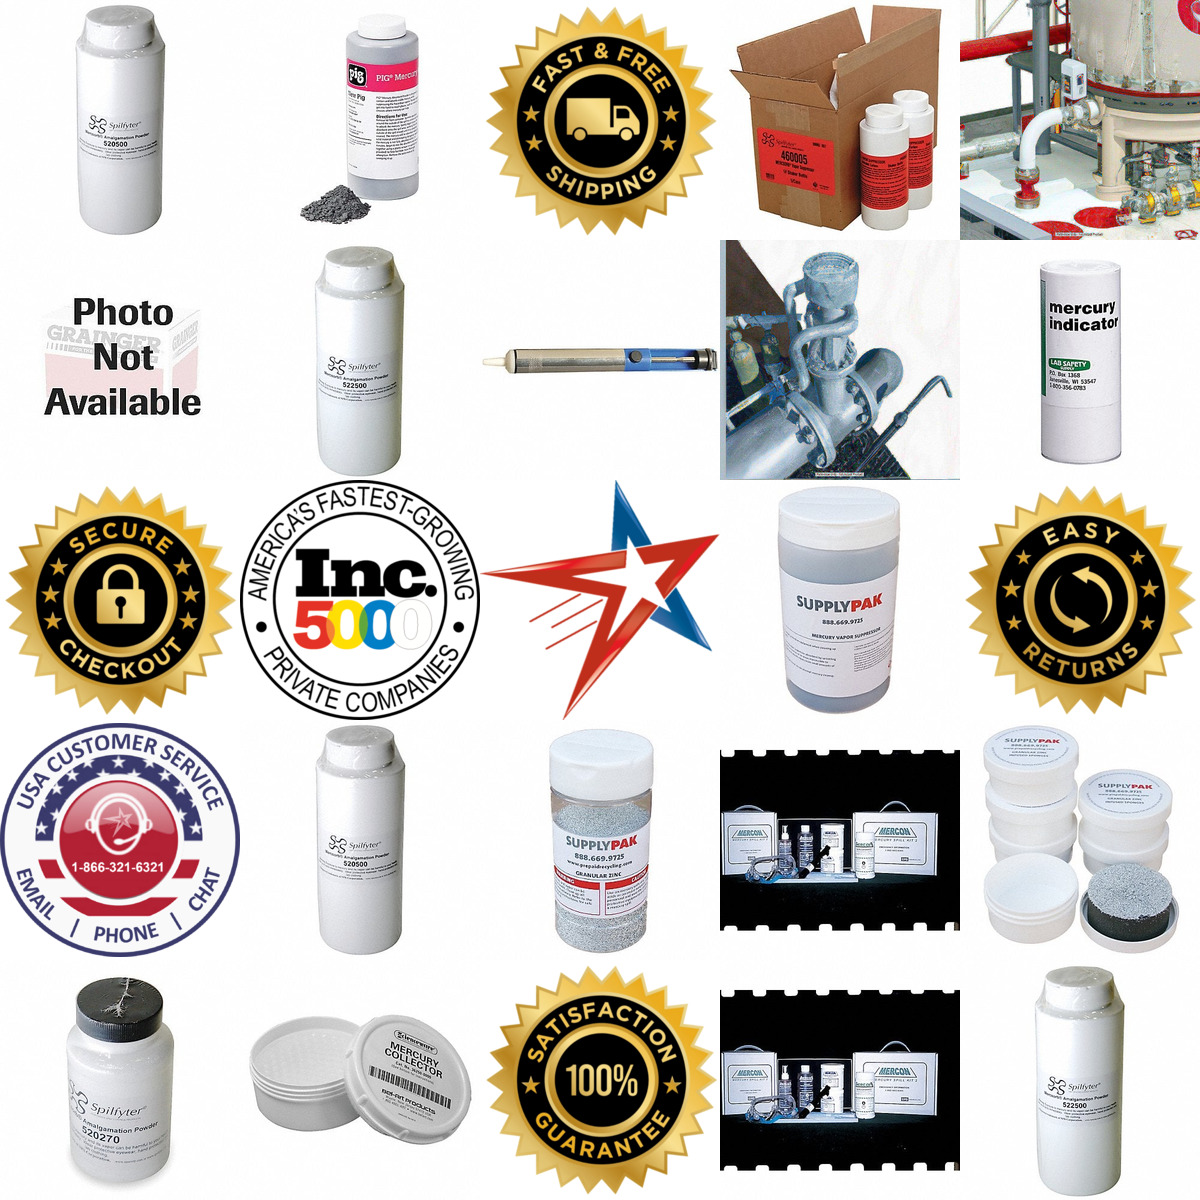 A selection of Mercury and Heavy Metal Spill Control products on GoVets